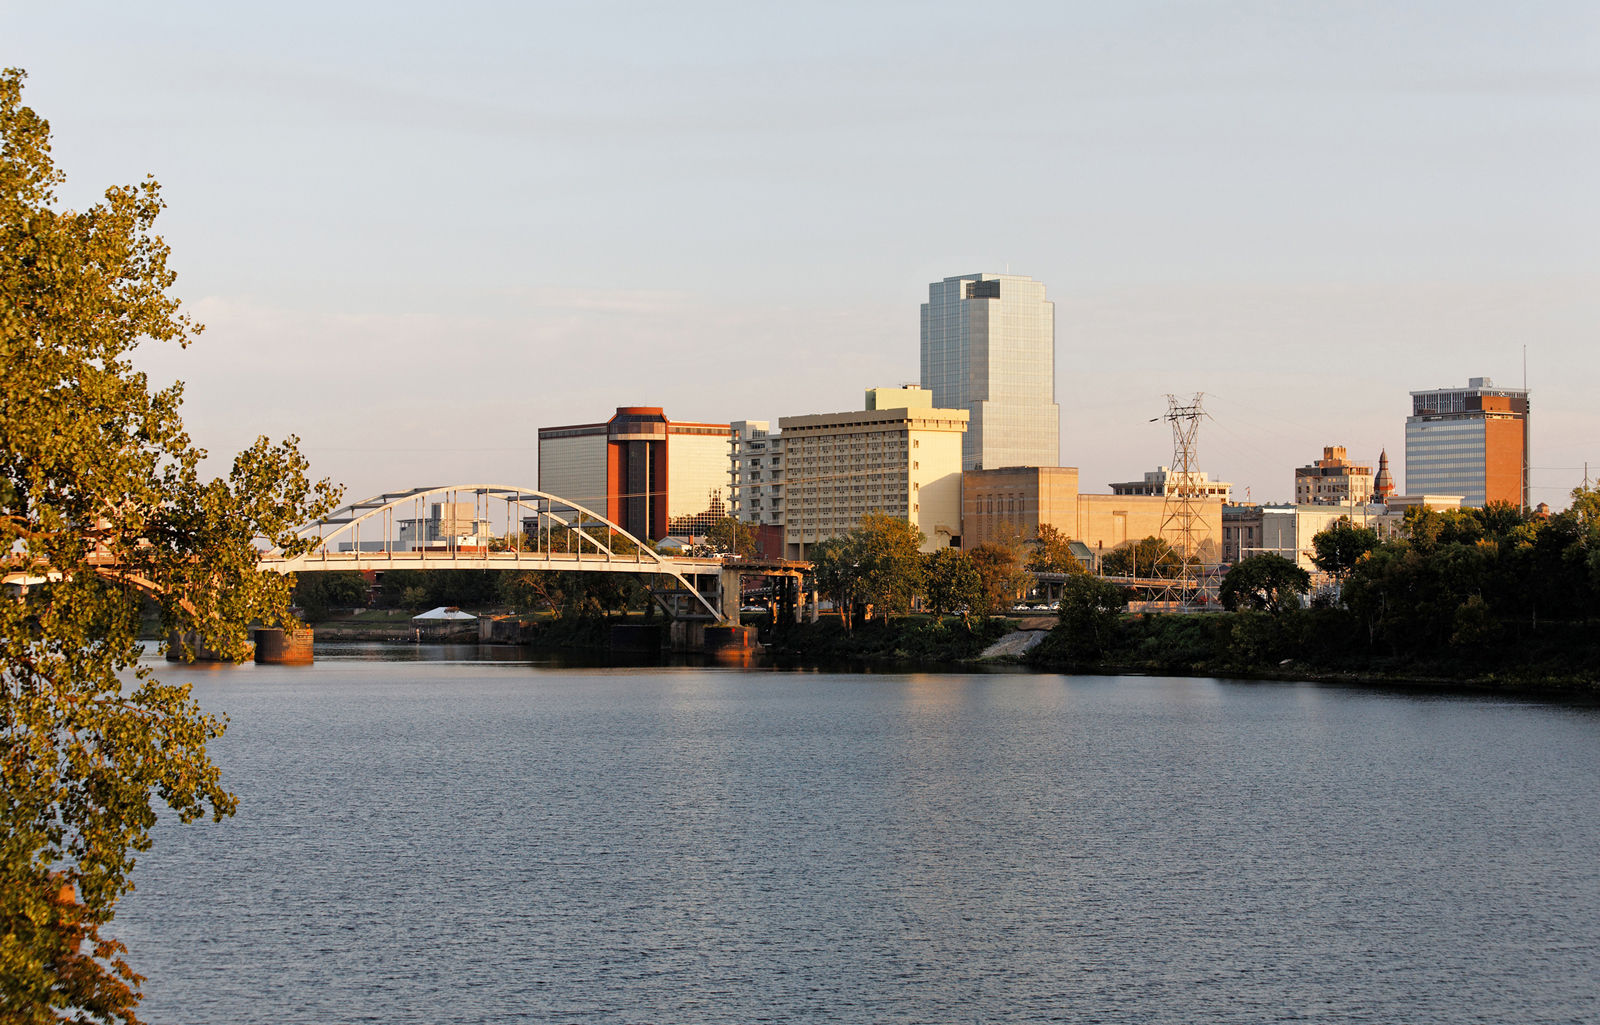 A view of the skyline of Little Rock, Arkansas at sunset.